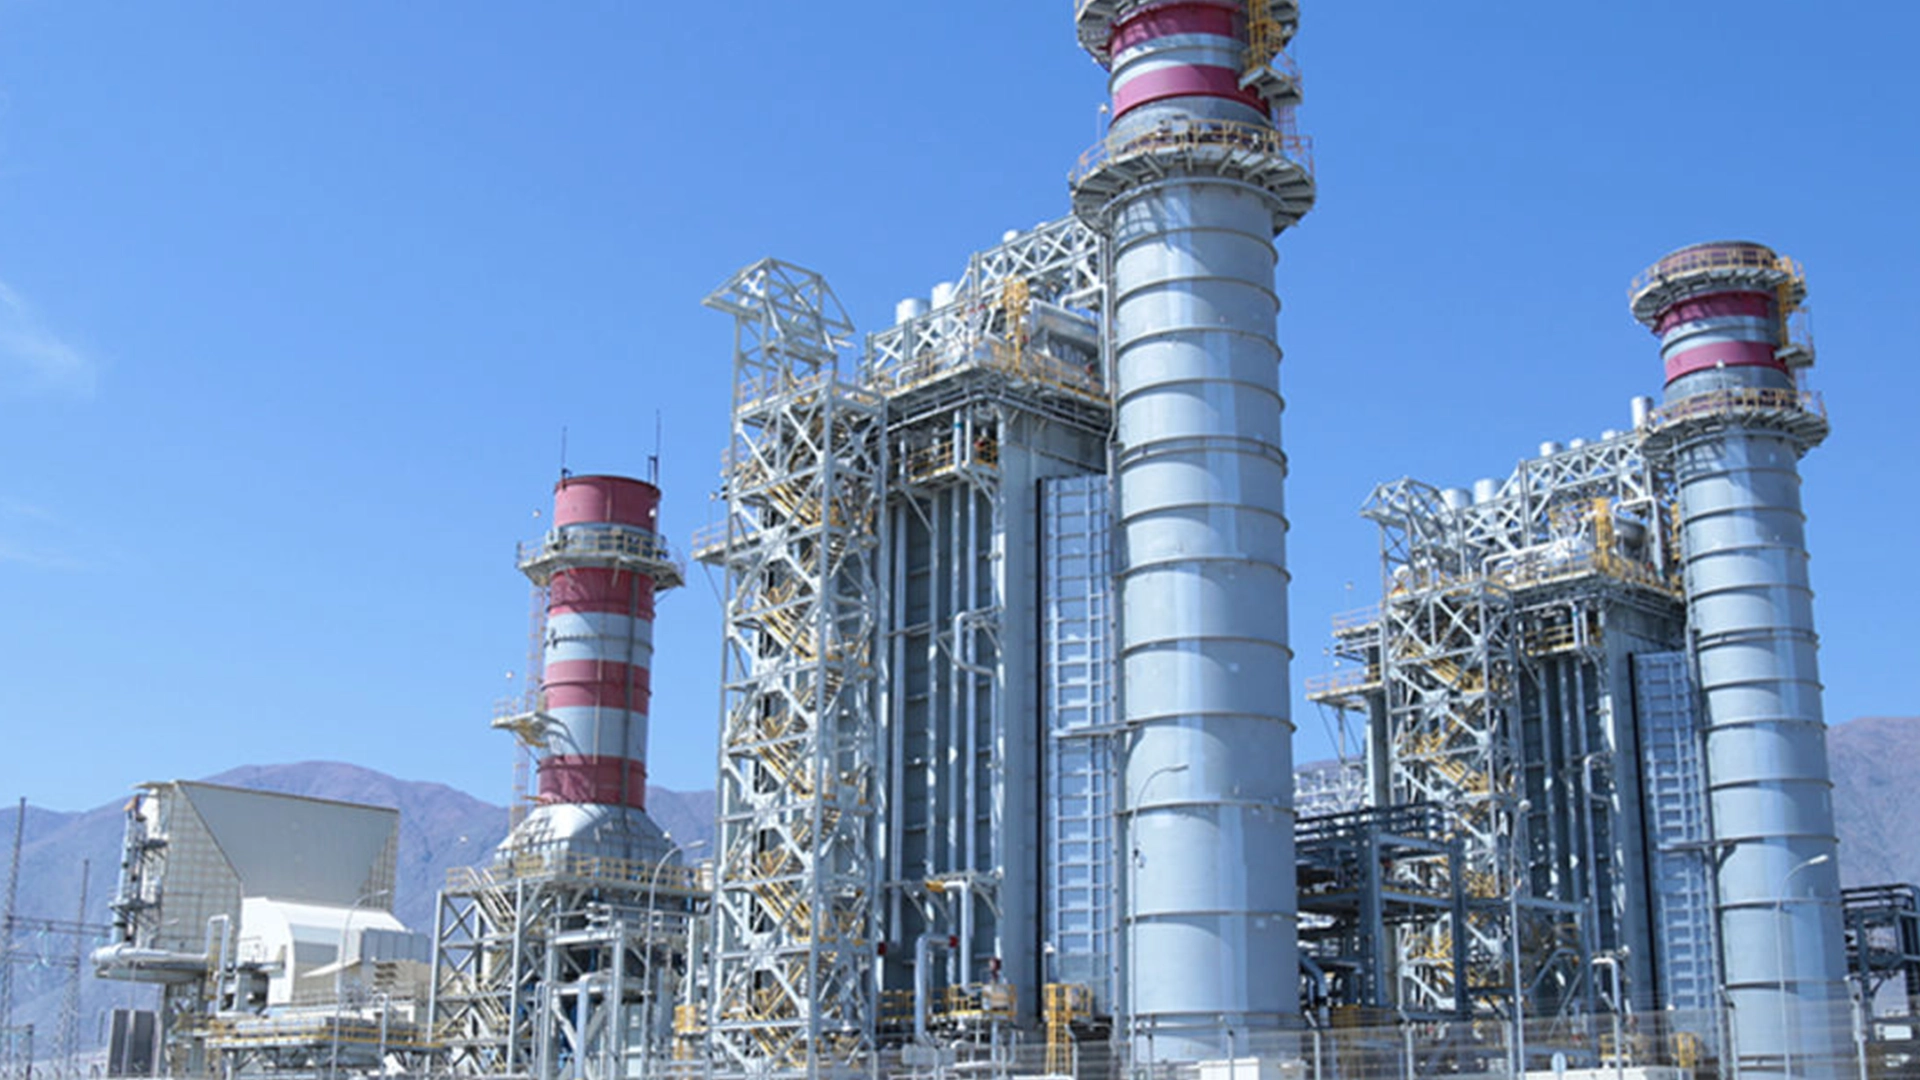 Voltex - Power Plant in Chile